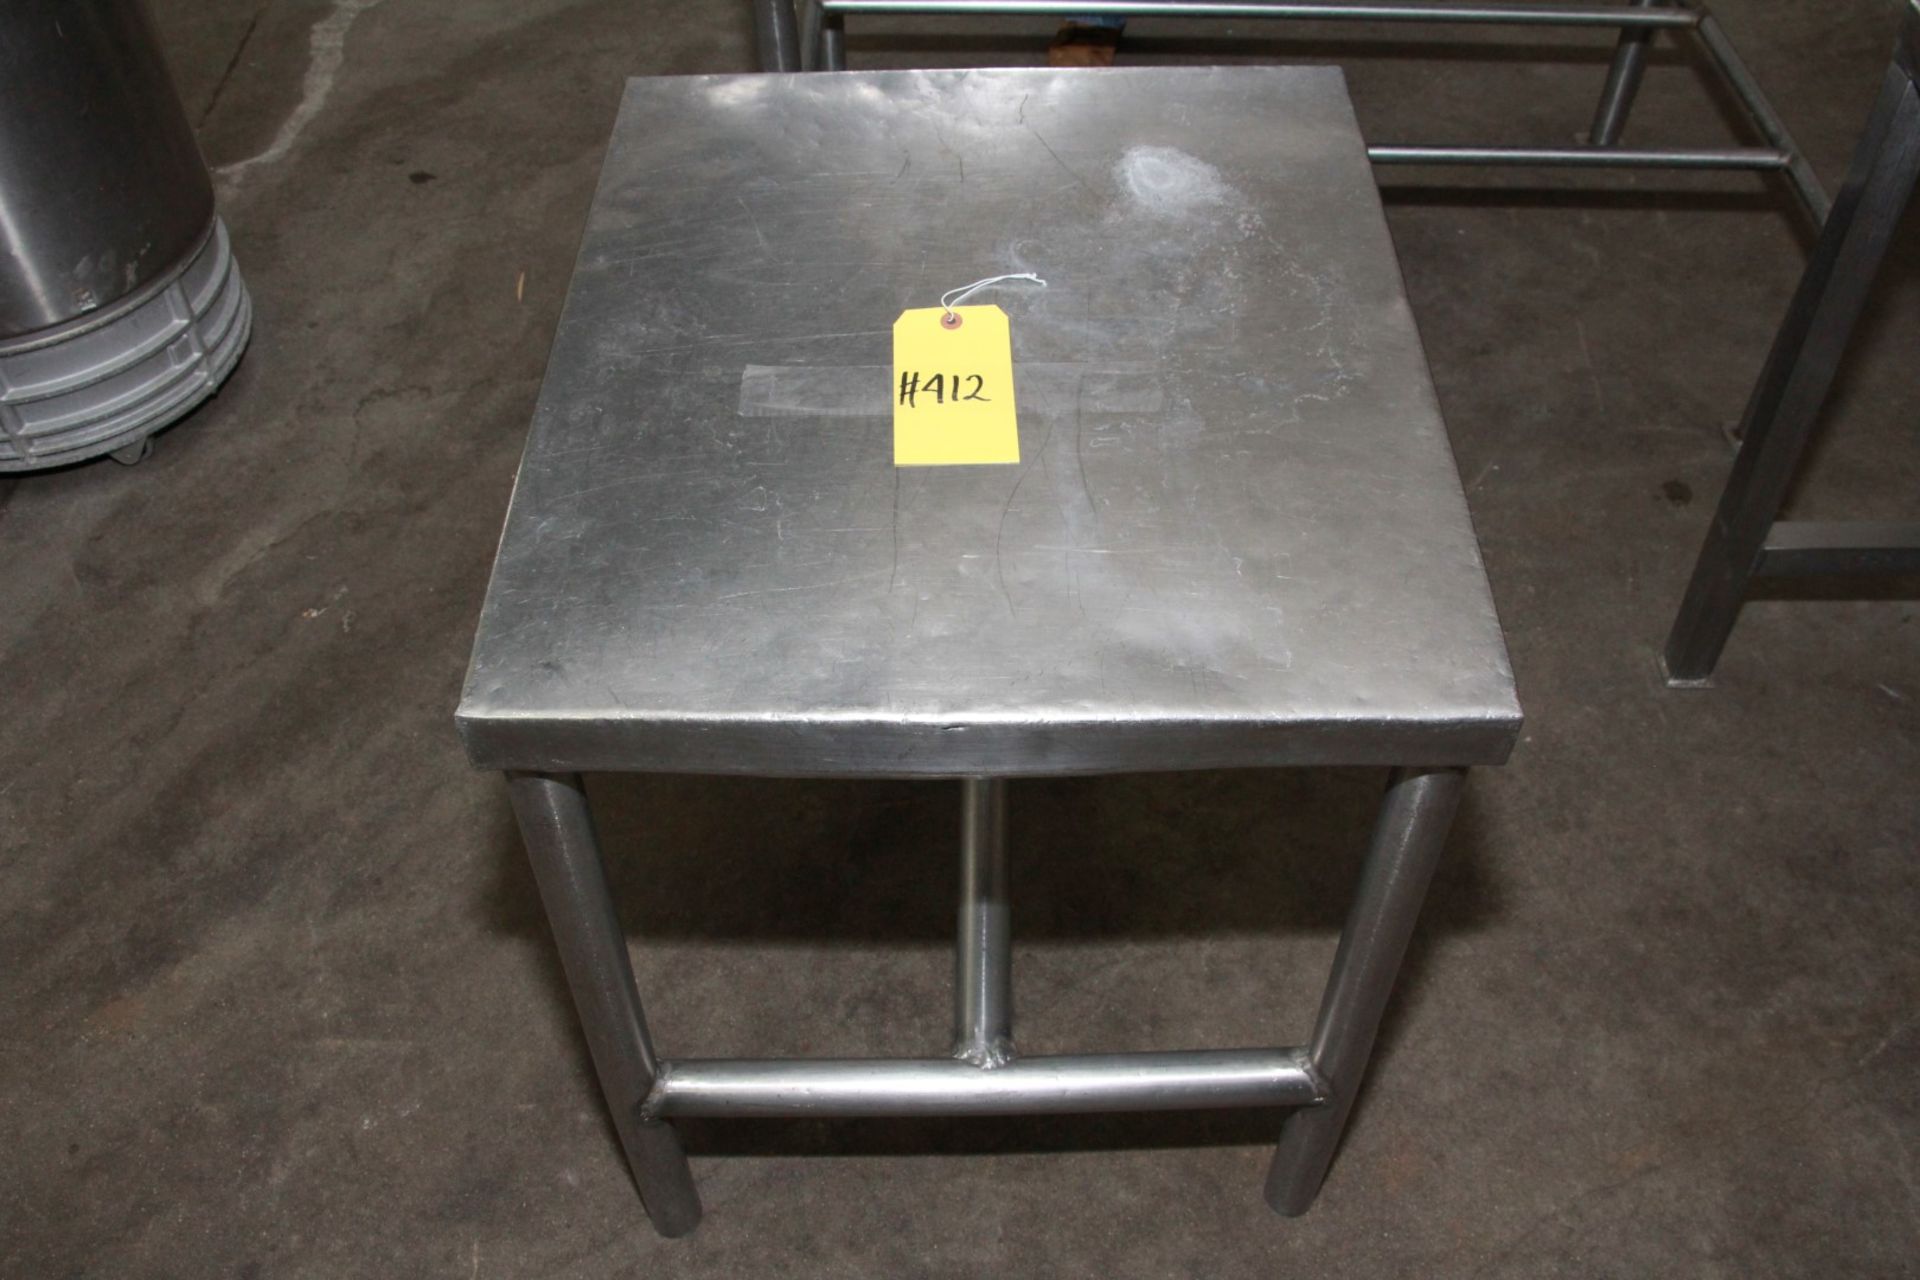 STAINLESS STEEL TABLE. 22" x 26" x 26"